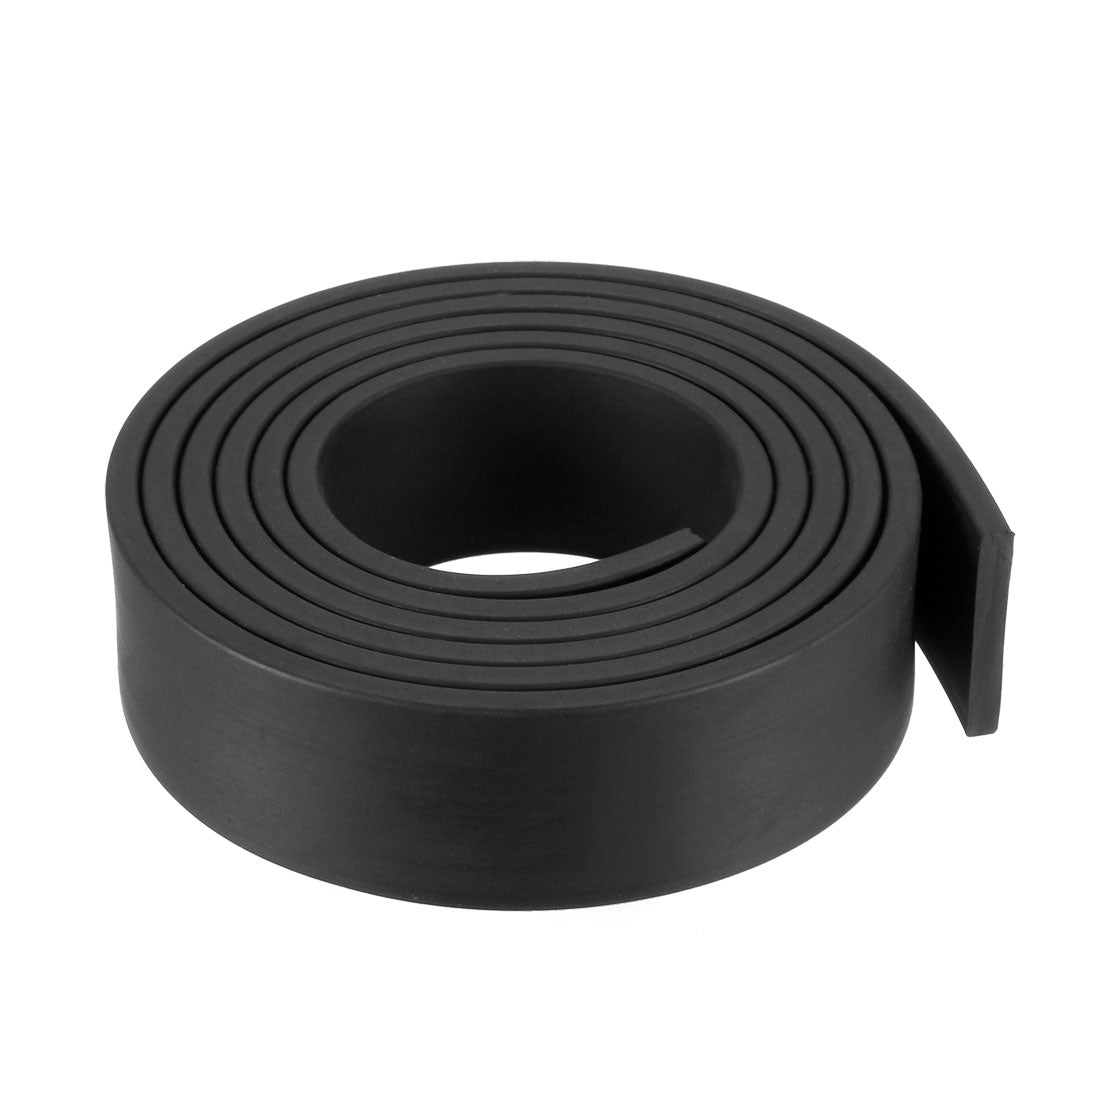 uxcell Uxcell Solid Rectangle Rubber Seal Strip 20mm Wide 3mm Thick, 1 Meter Long Black